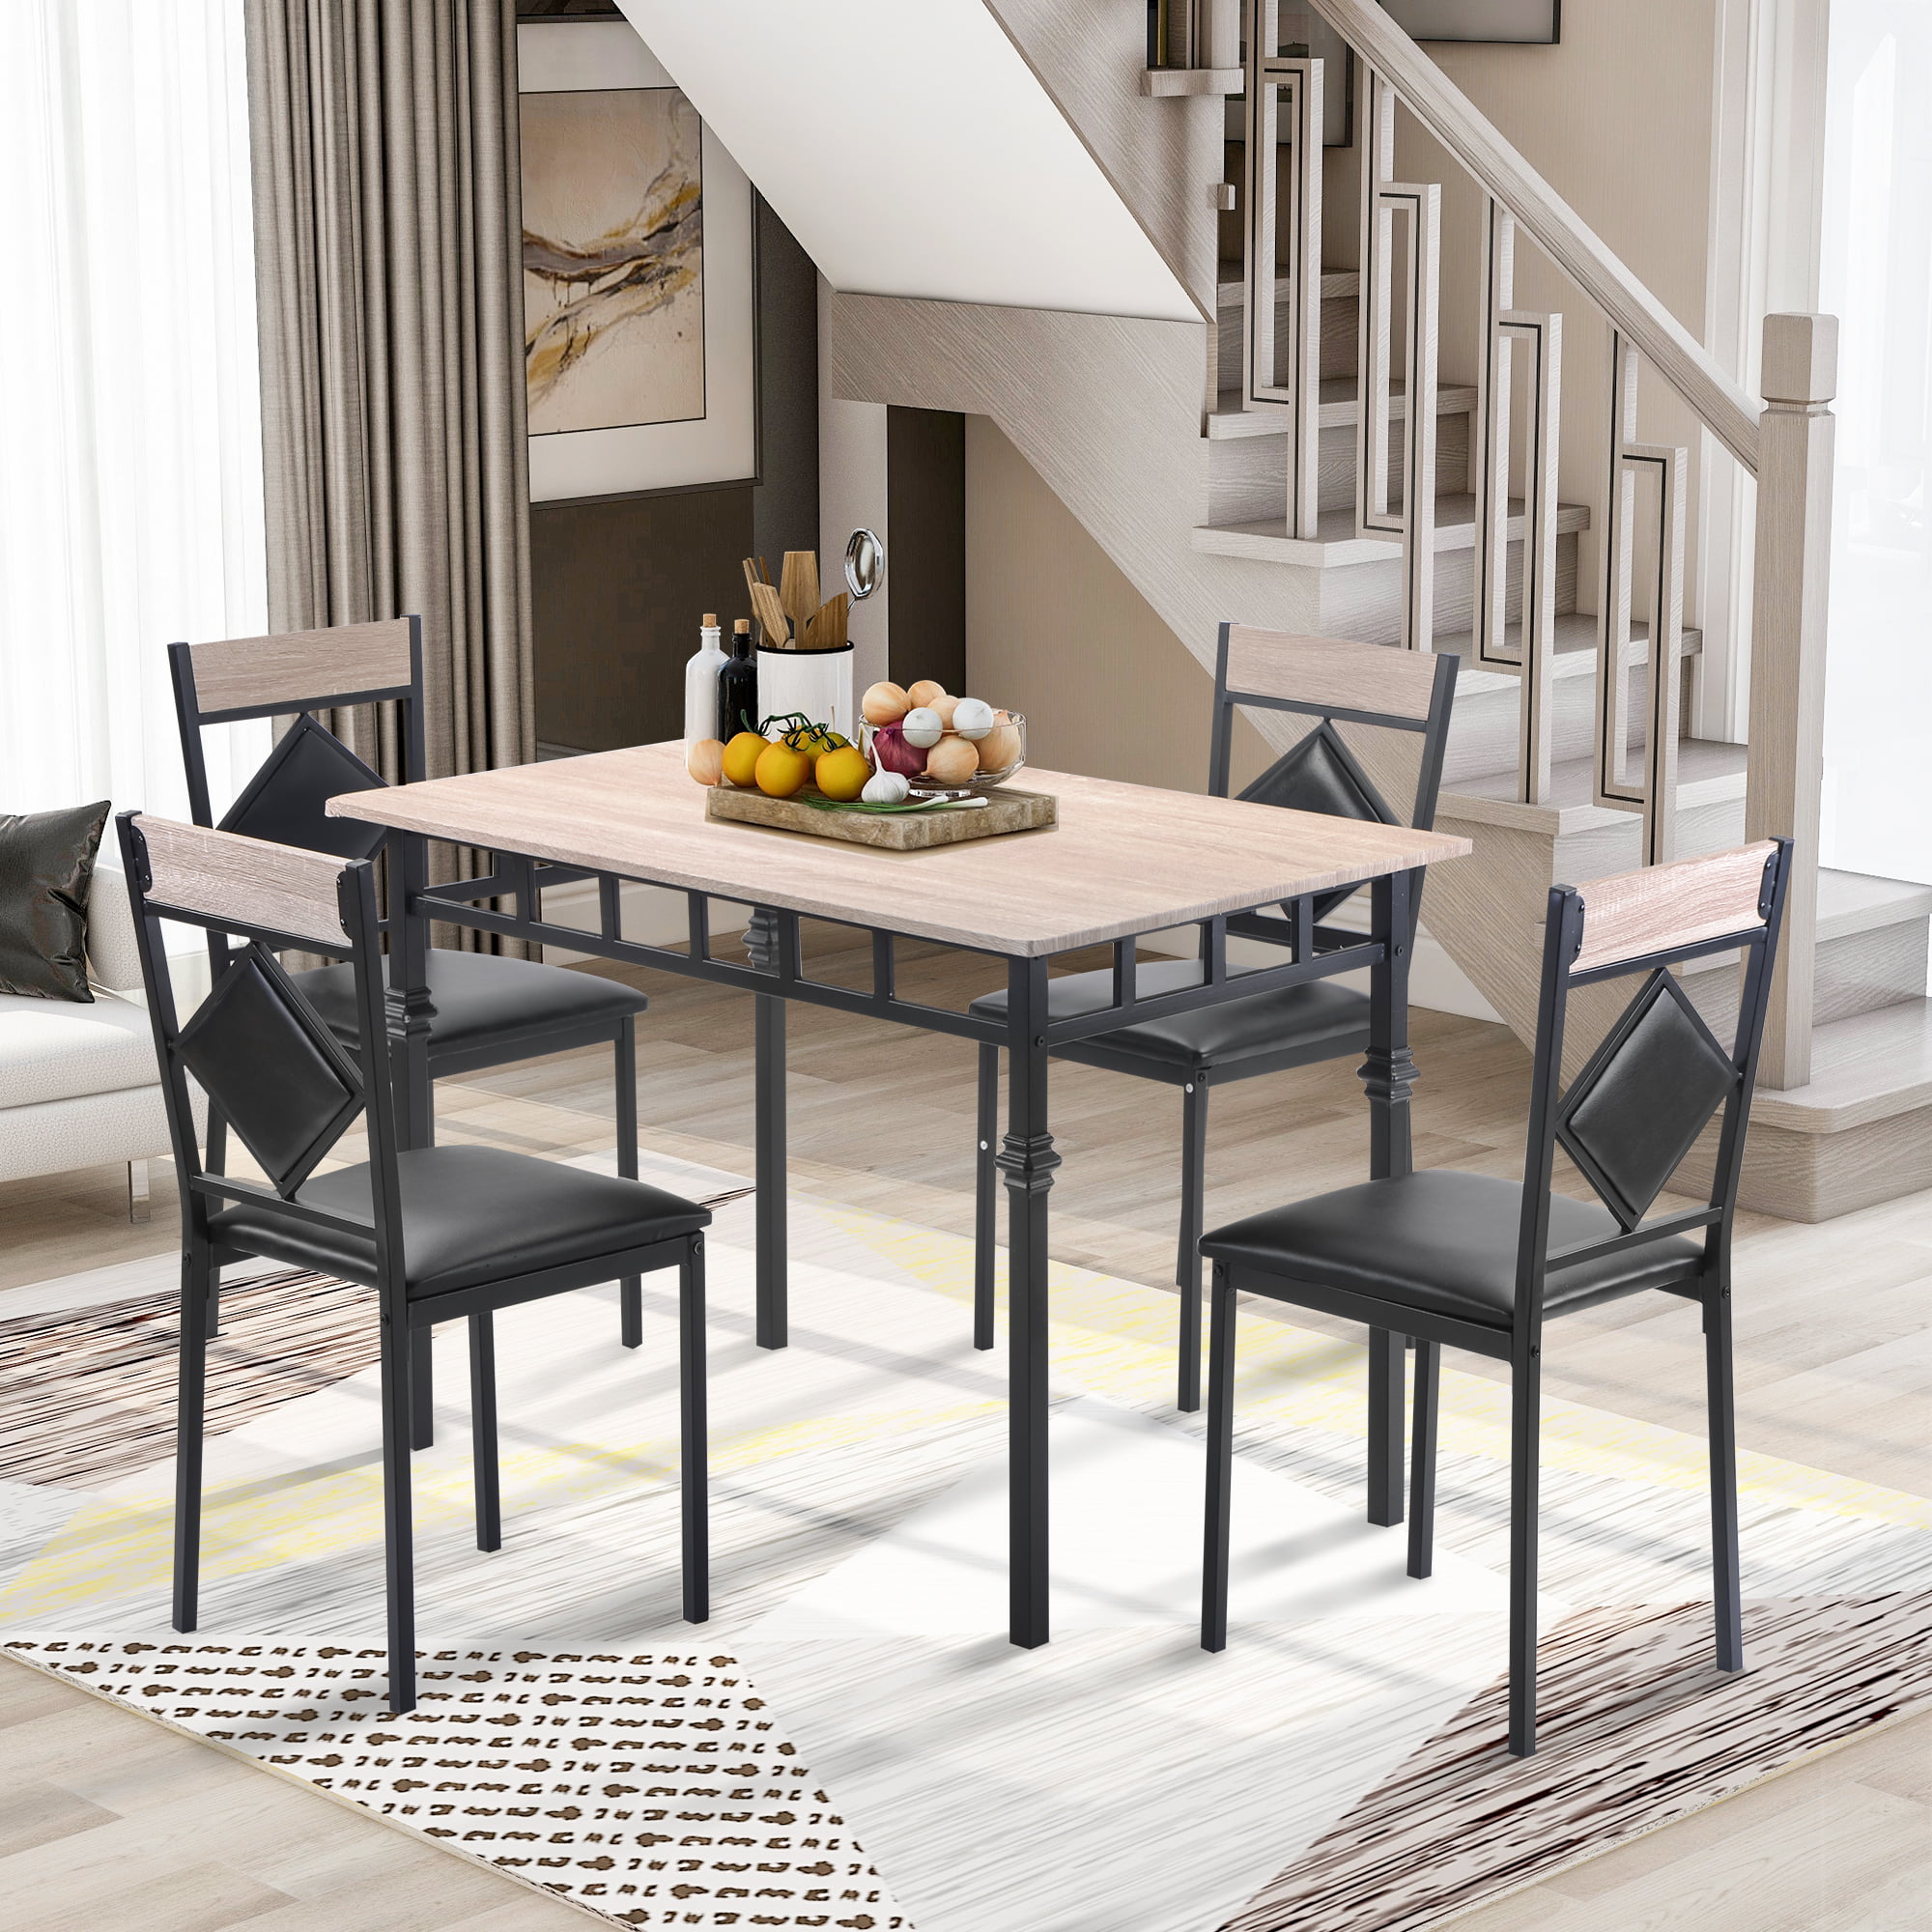 Modern 5-Piece Wooden Kitchen Dining Table Set with Metal Frame